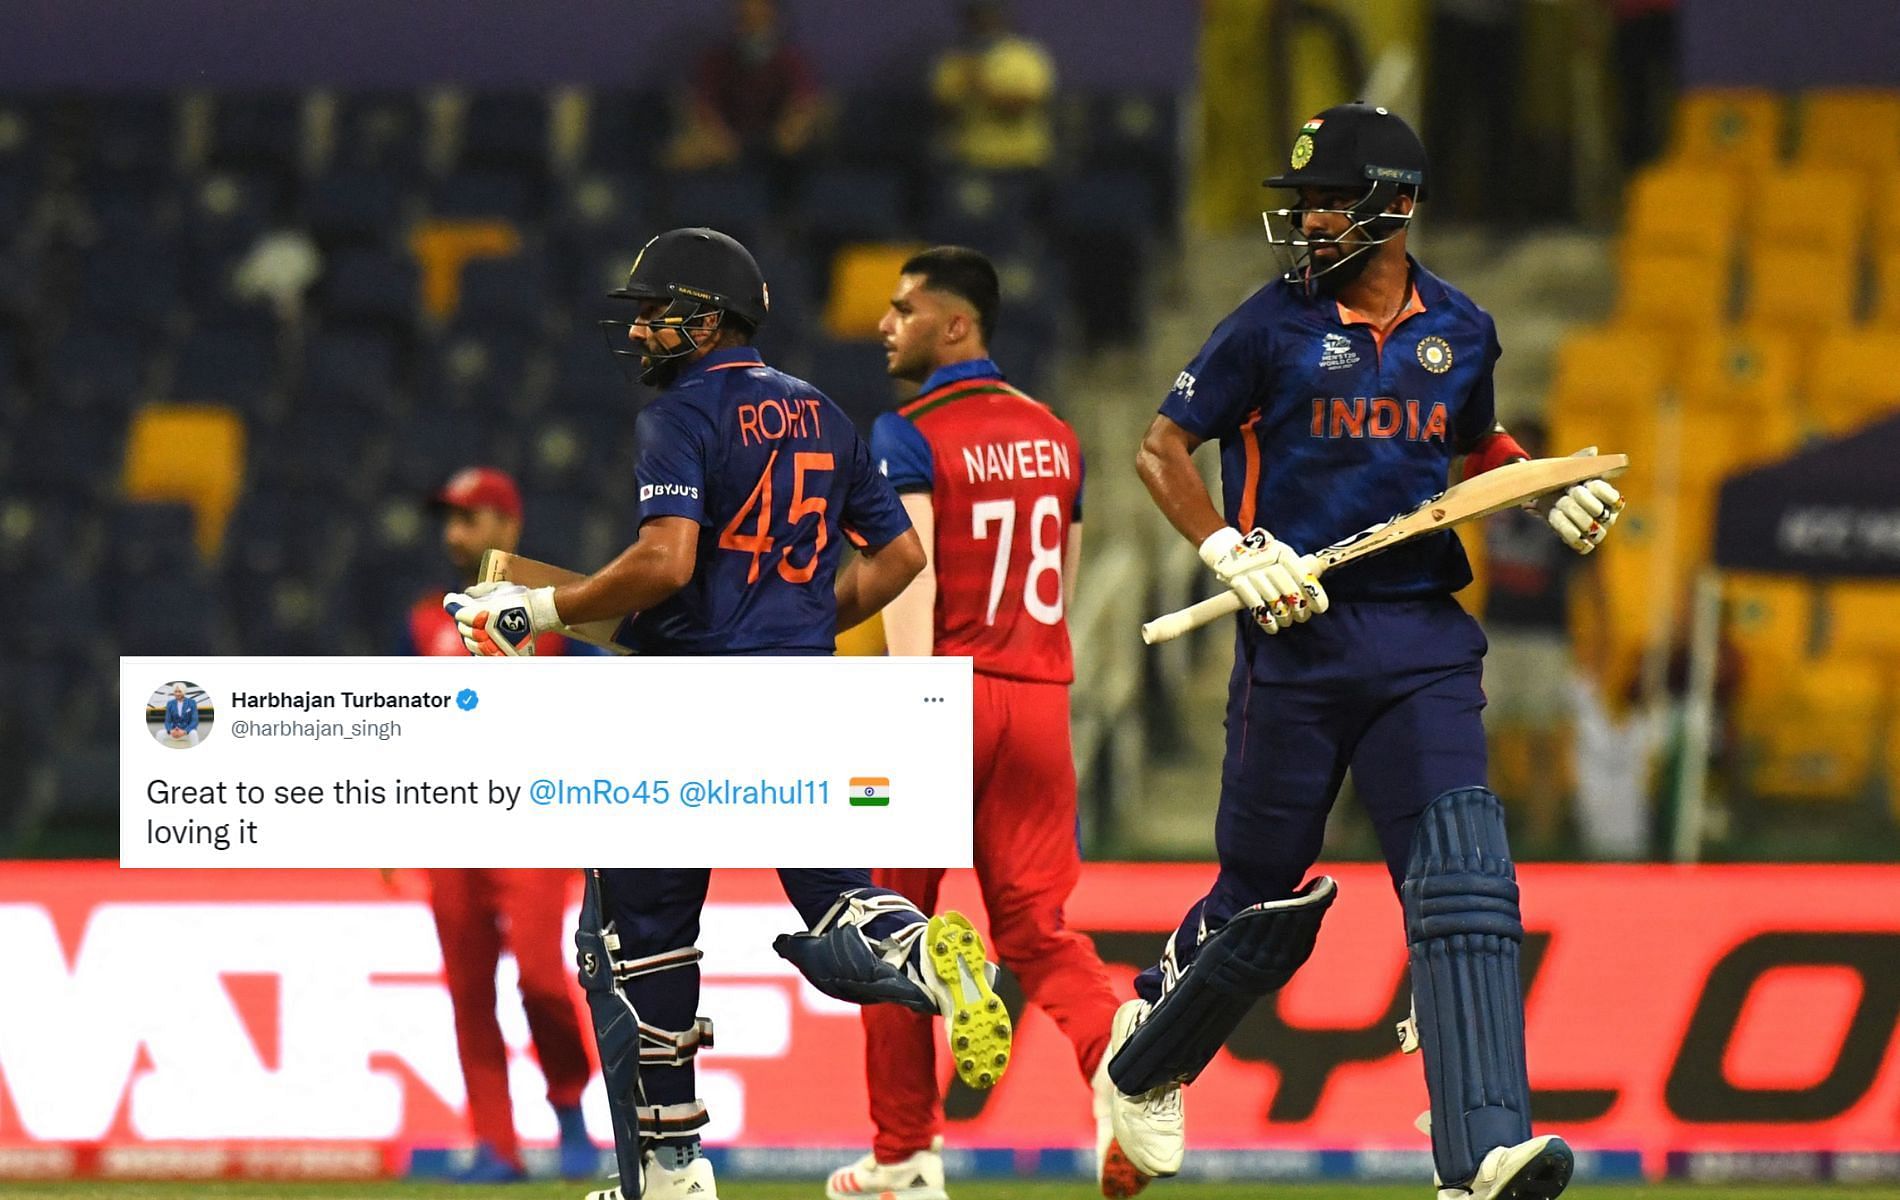 T20 World Cup: Rohit Sharma and KL Rahul put on a 140-run partnership for India.